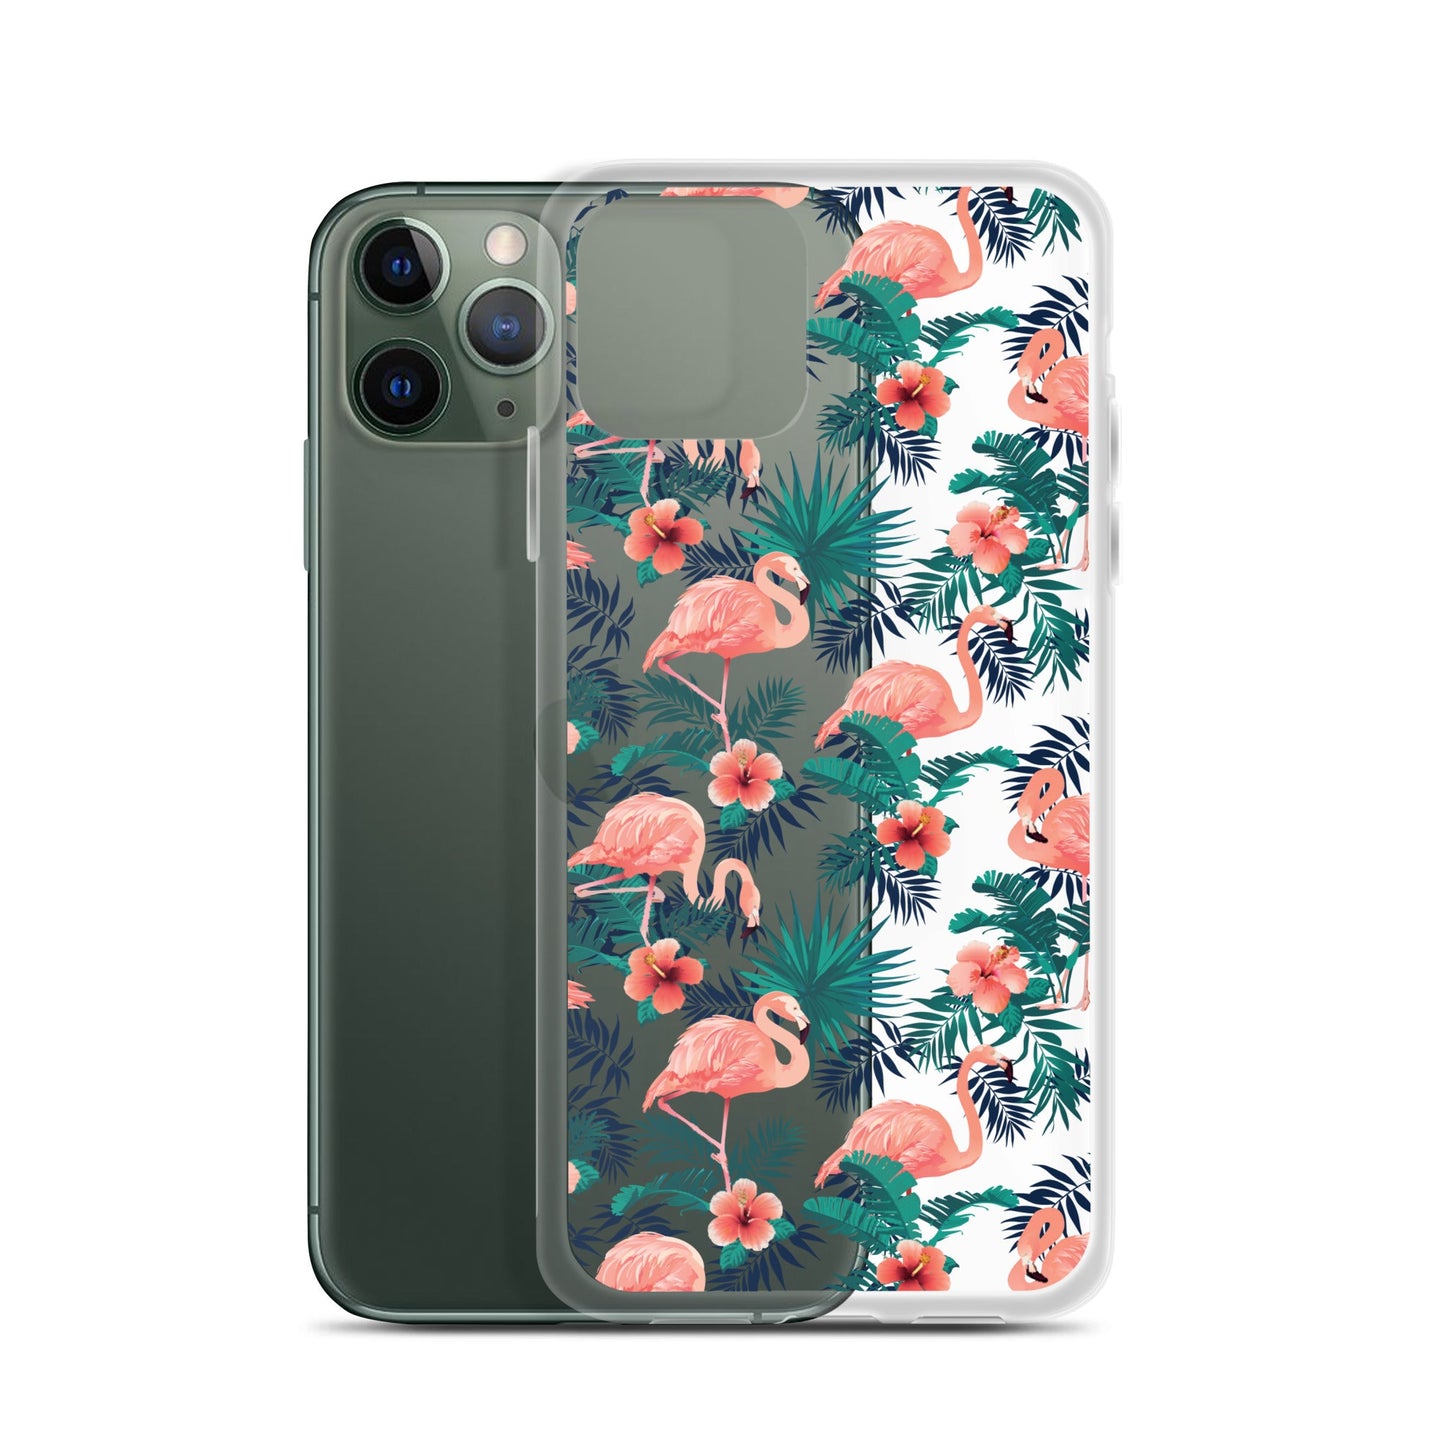 Pink Flamingo Tropical Pattern iPhone Case